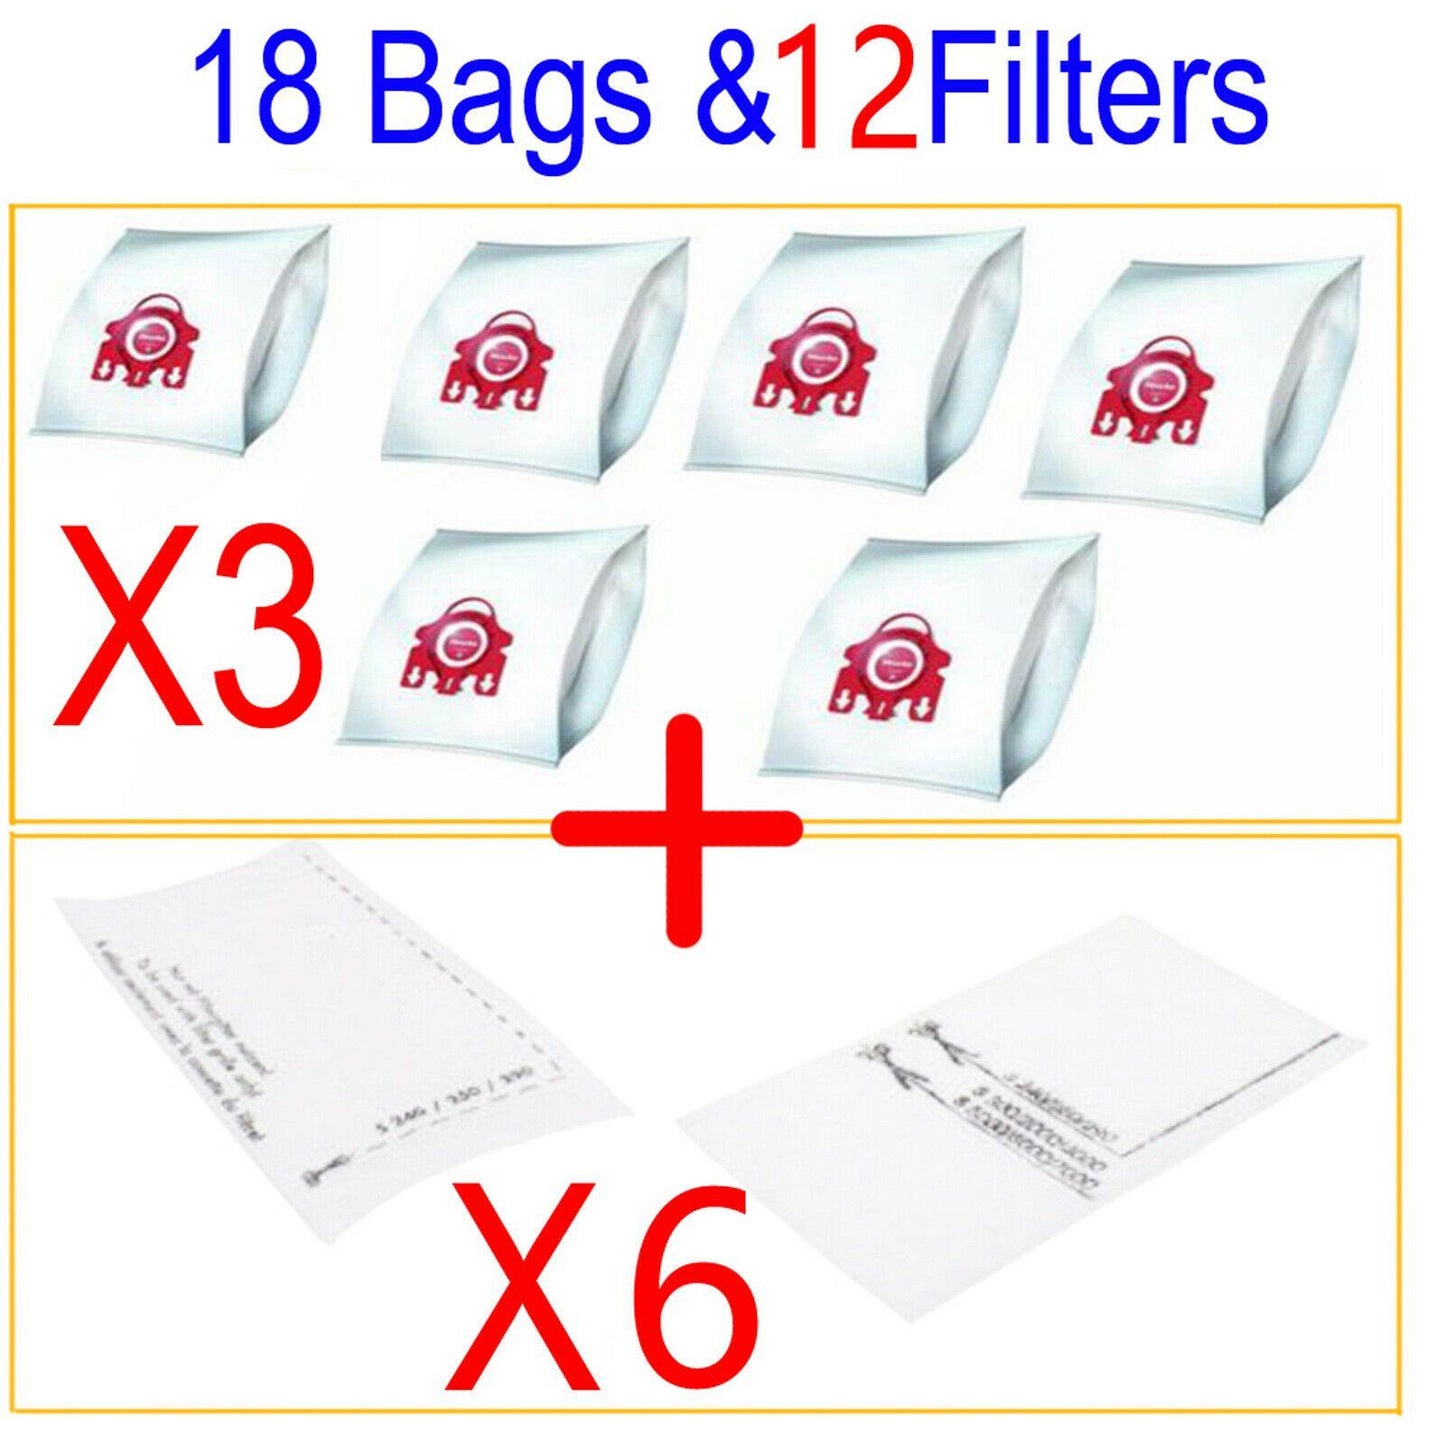 18 Vacuum Dust Bags & 12 Filters For Miele FJM S2 S4000 S4210 S4211 S4212 S4812 Sparesbarn